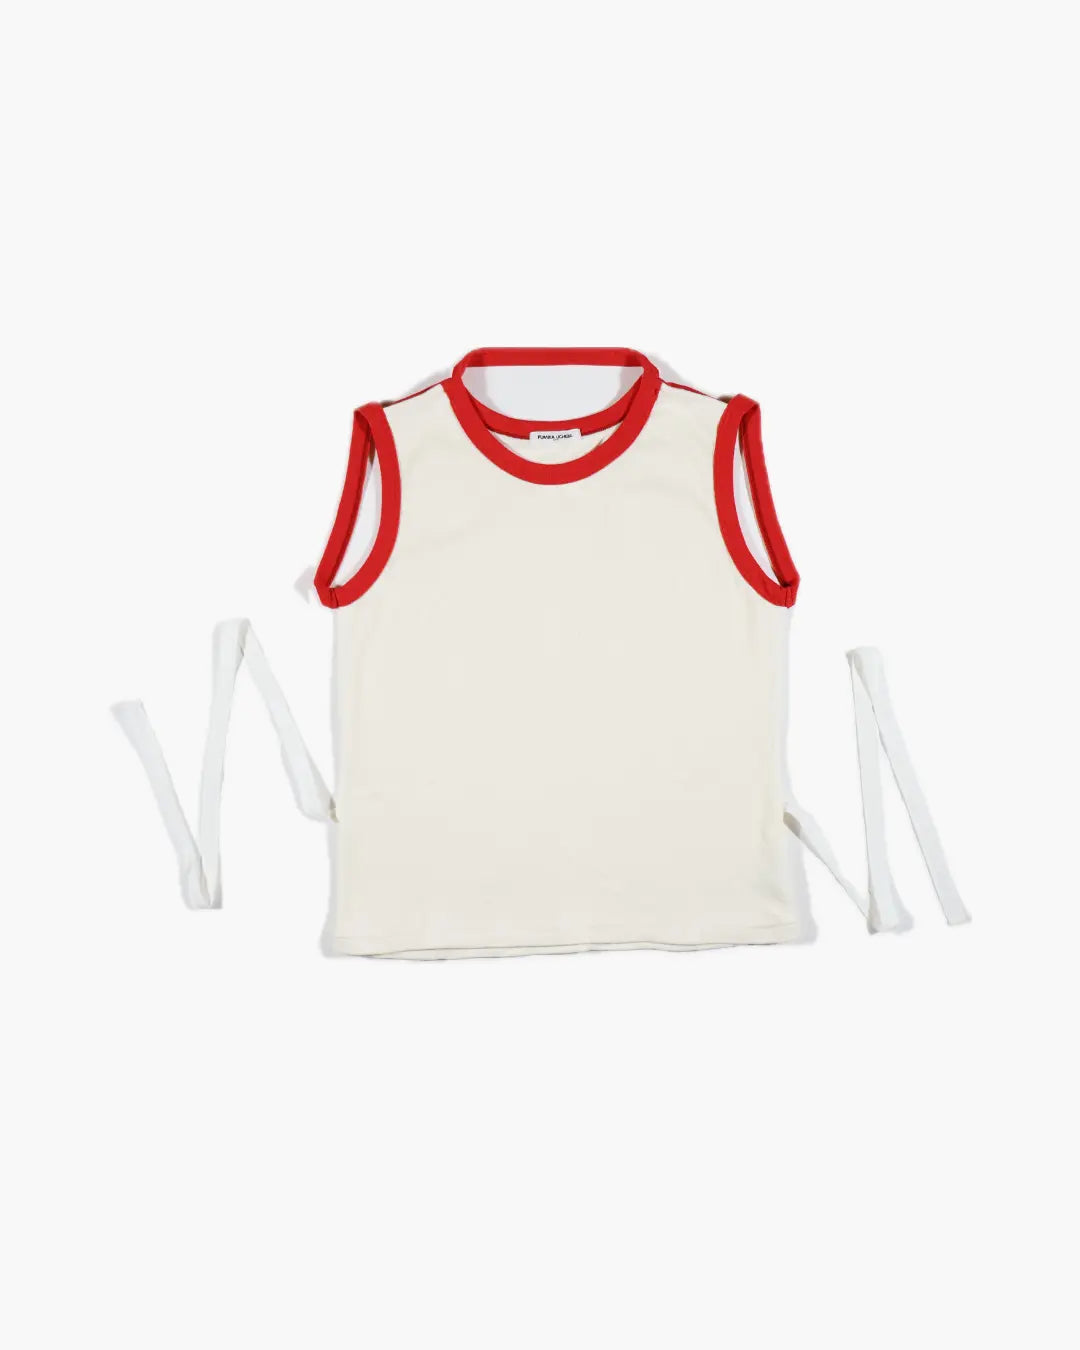 FUMIKA_UCHIDA / TRIMMED APRON TEE / OFFWHITE/RED